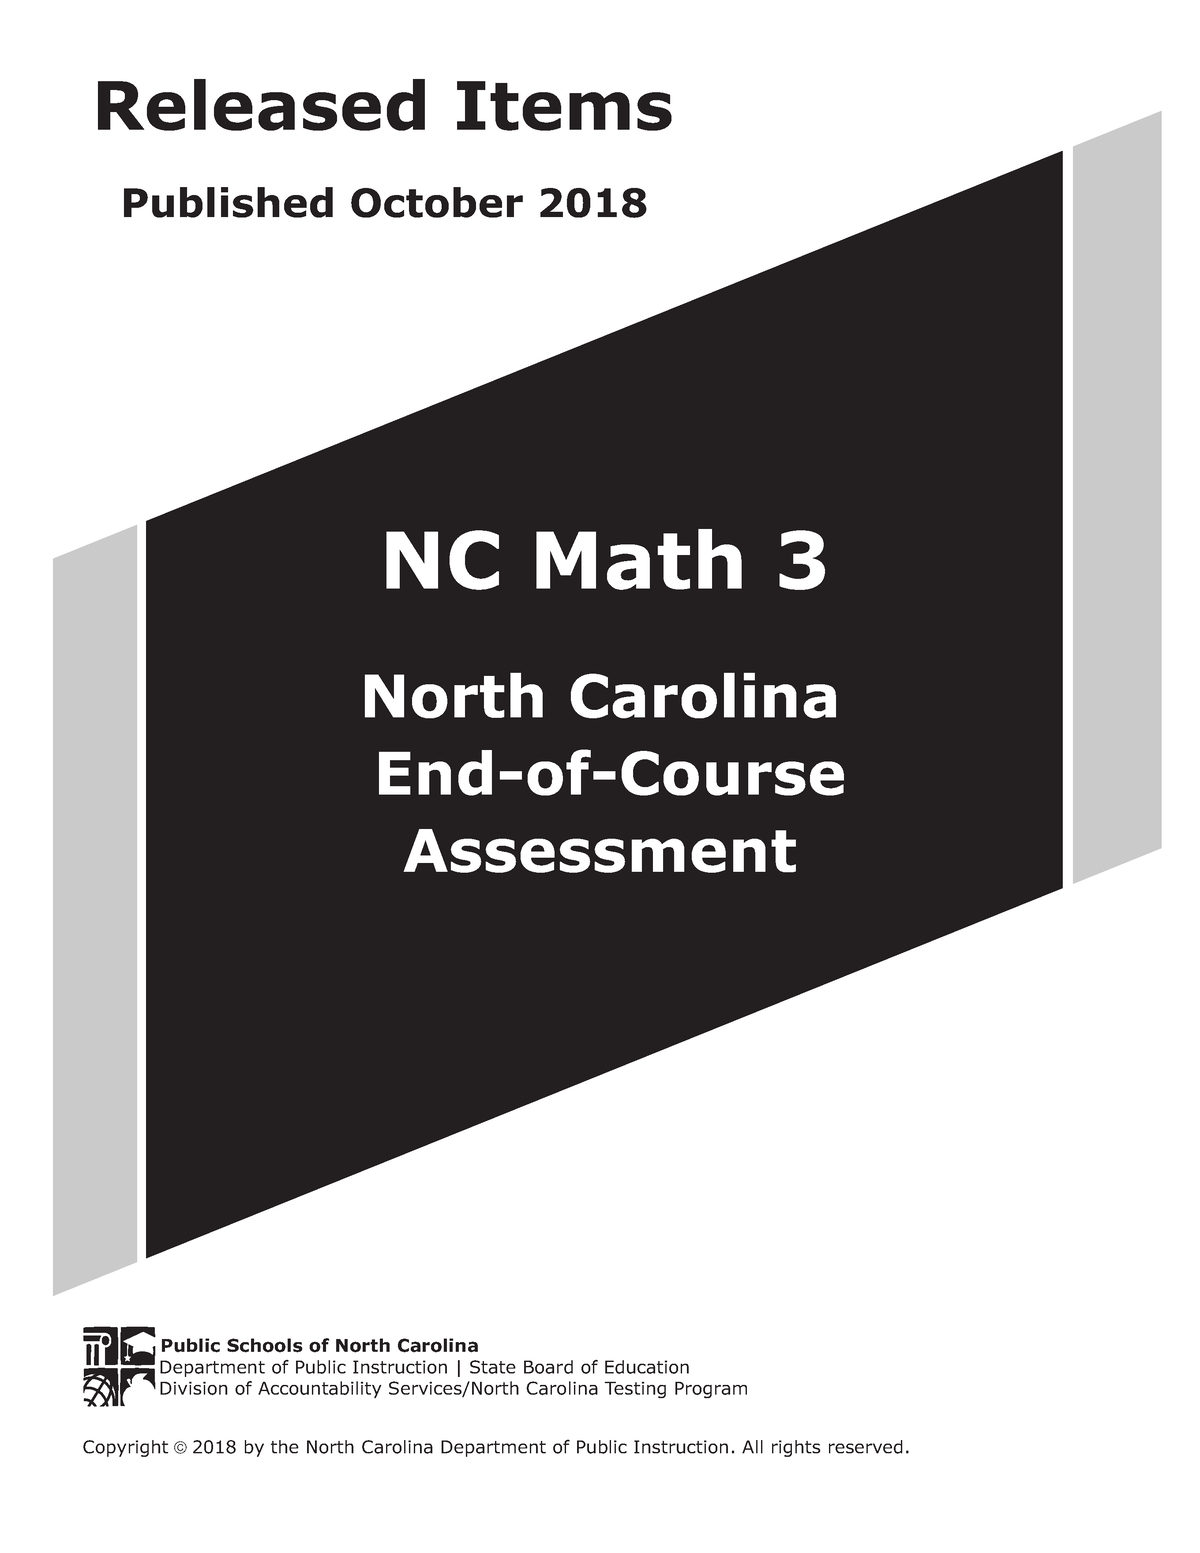 EOC NC Math 3 Released Form 1 Released Items Published October 2018